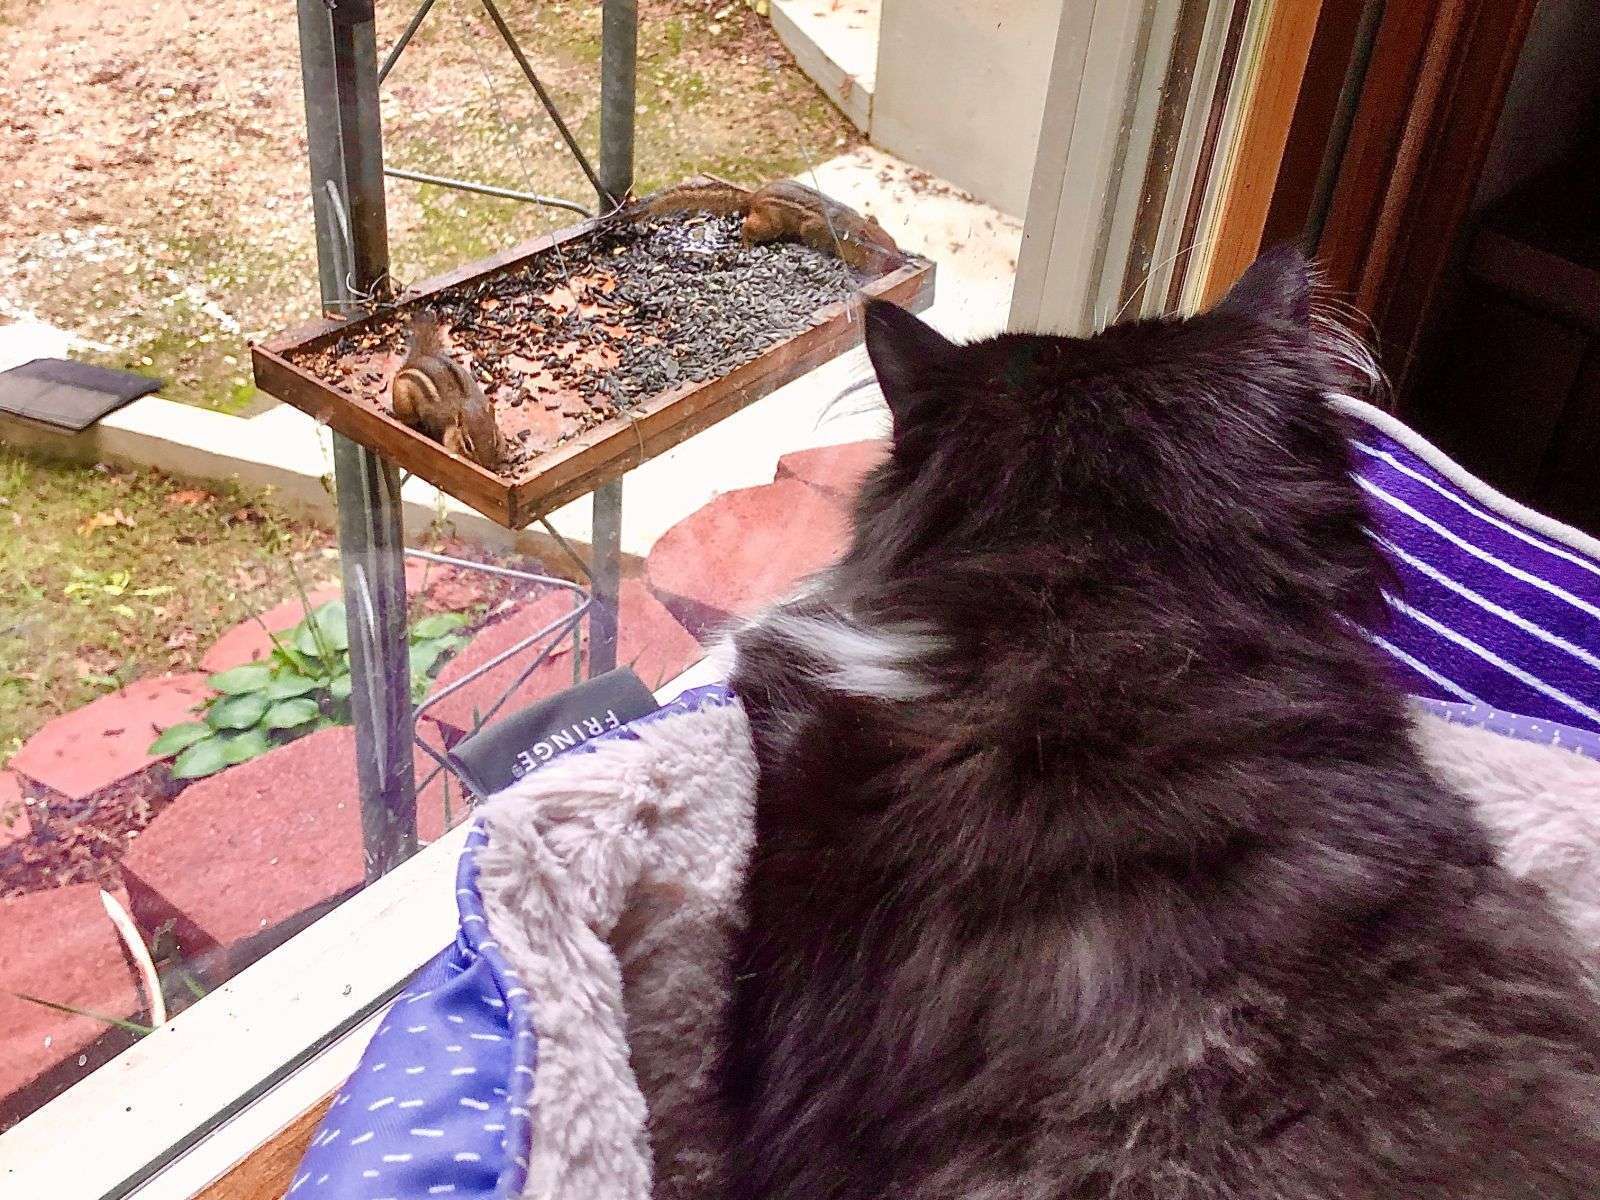 Long haired tuxedo cat watching the chipmunks in the wildlife feeder.